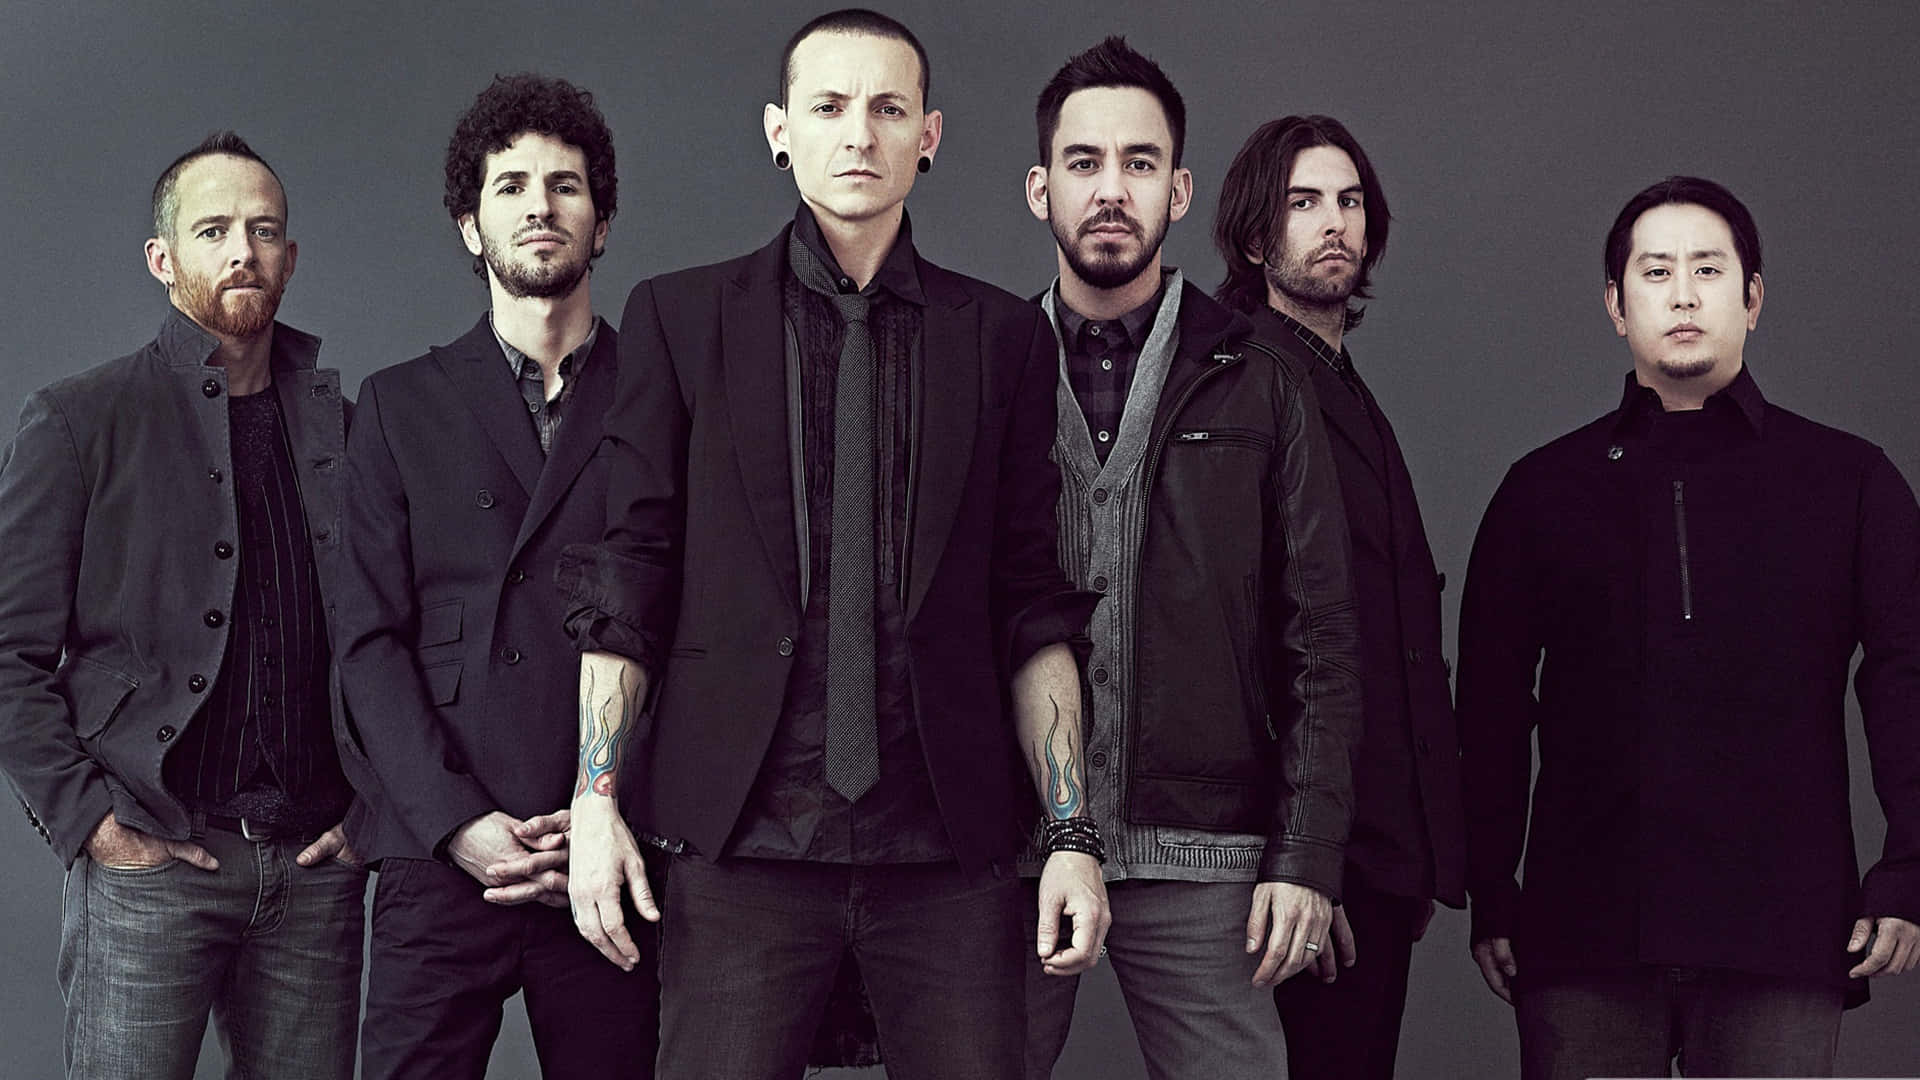 "One of the most iconic rock bands of our time, Linkin Park, seen here in all their 4K glory." Wallpaper